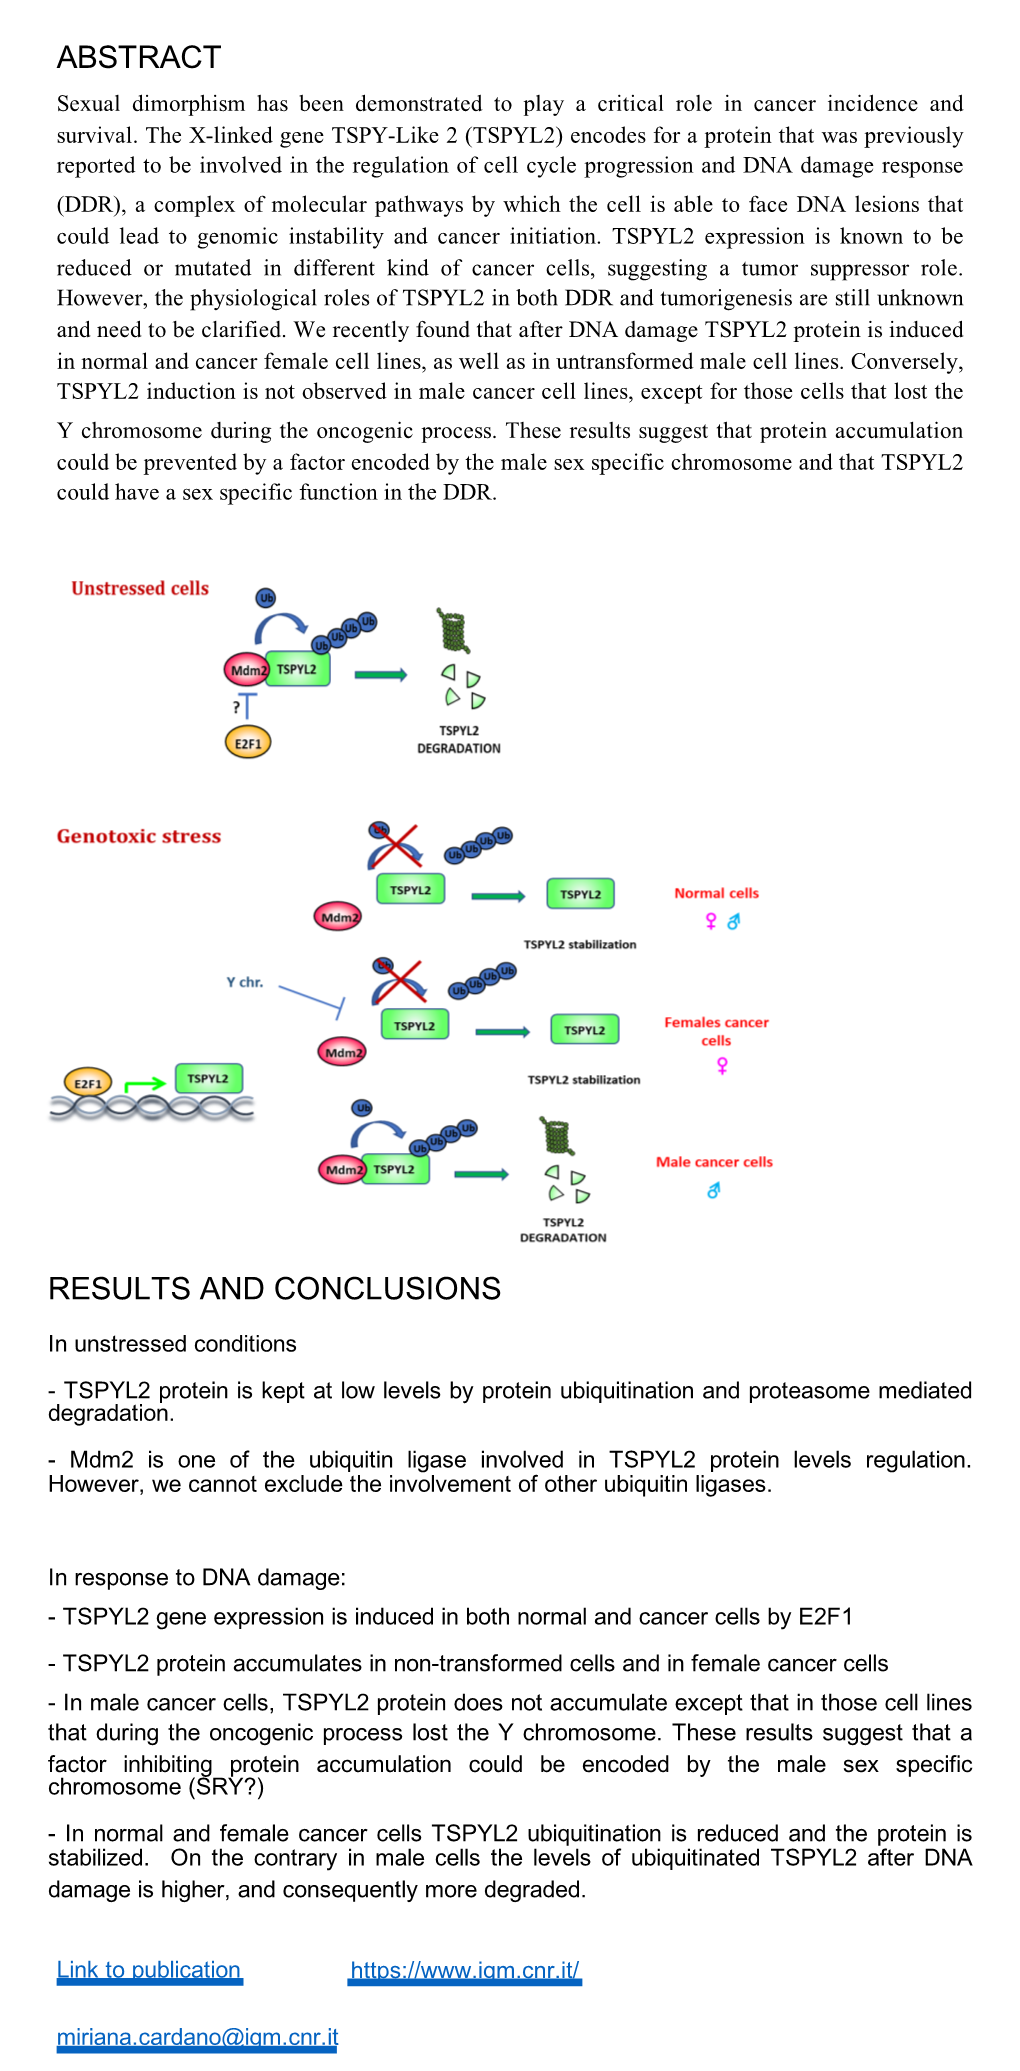 TSPYL2 Is a Novel Regulator of SIRT1 and P300 Activity in Response to DNA Damage